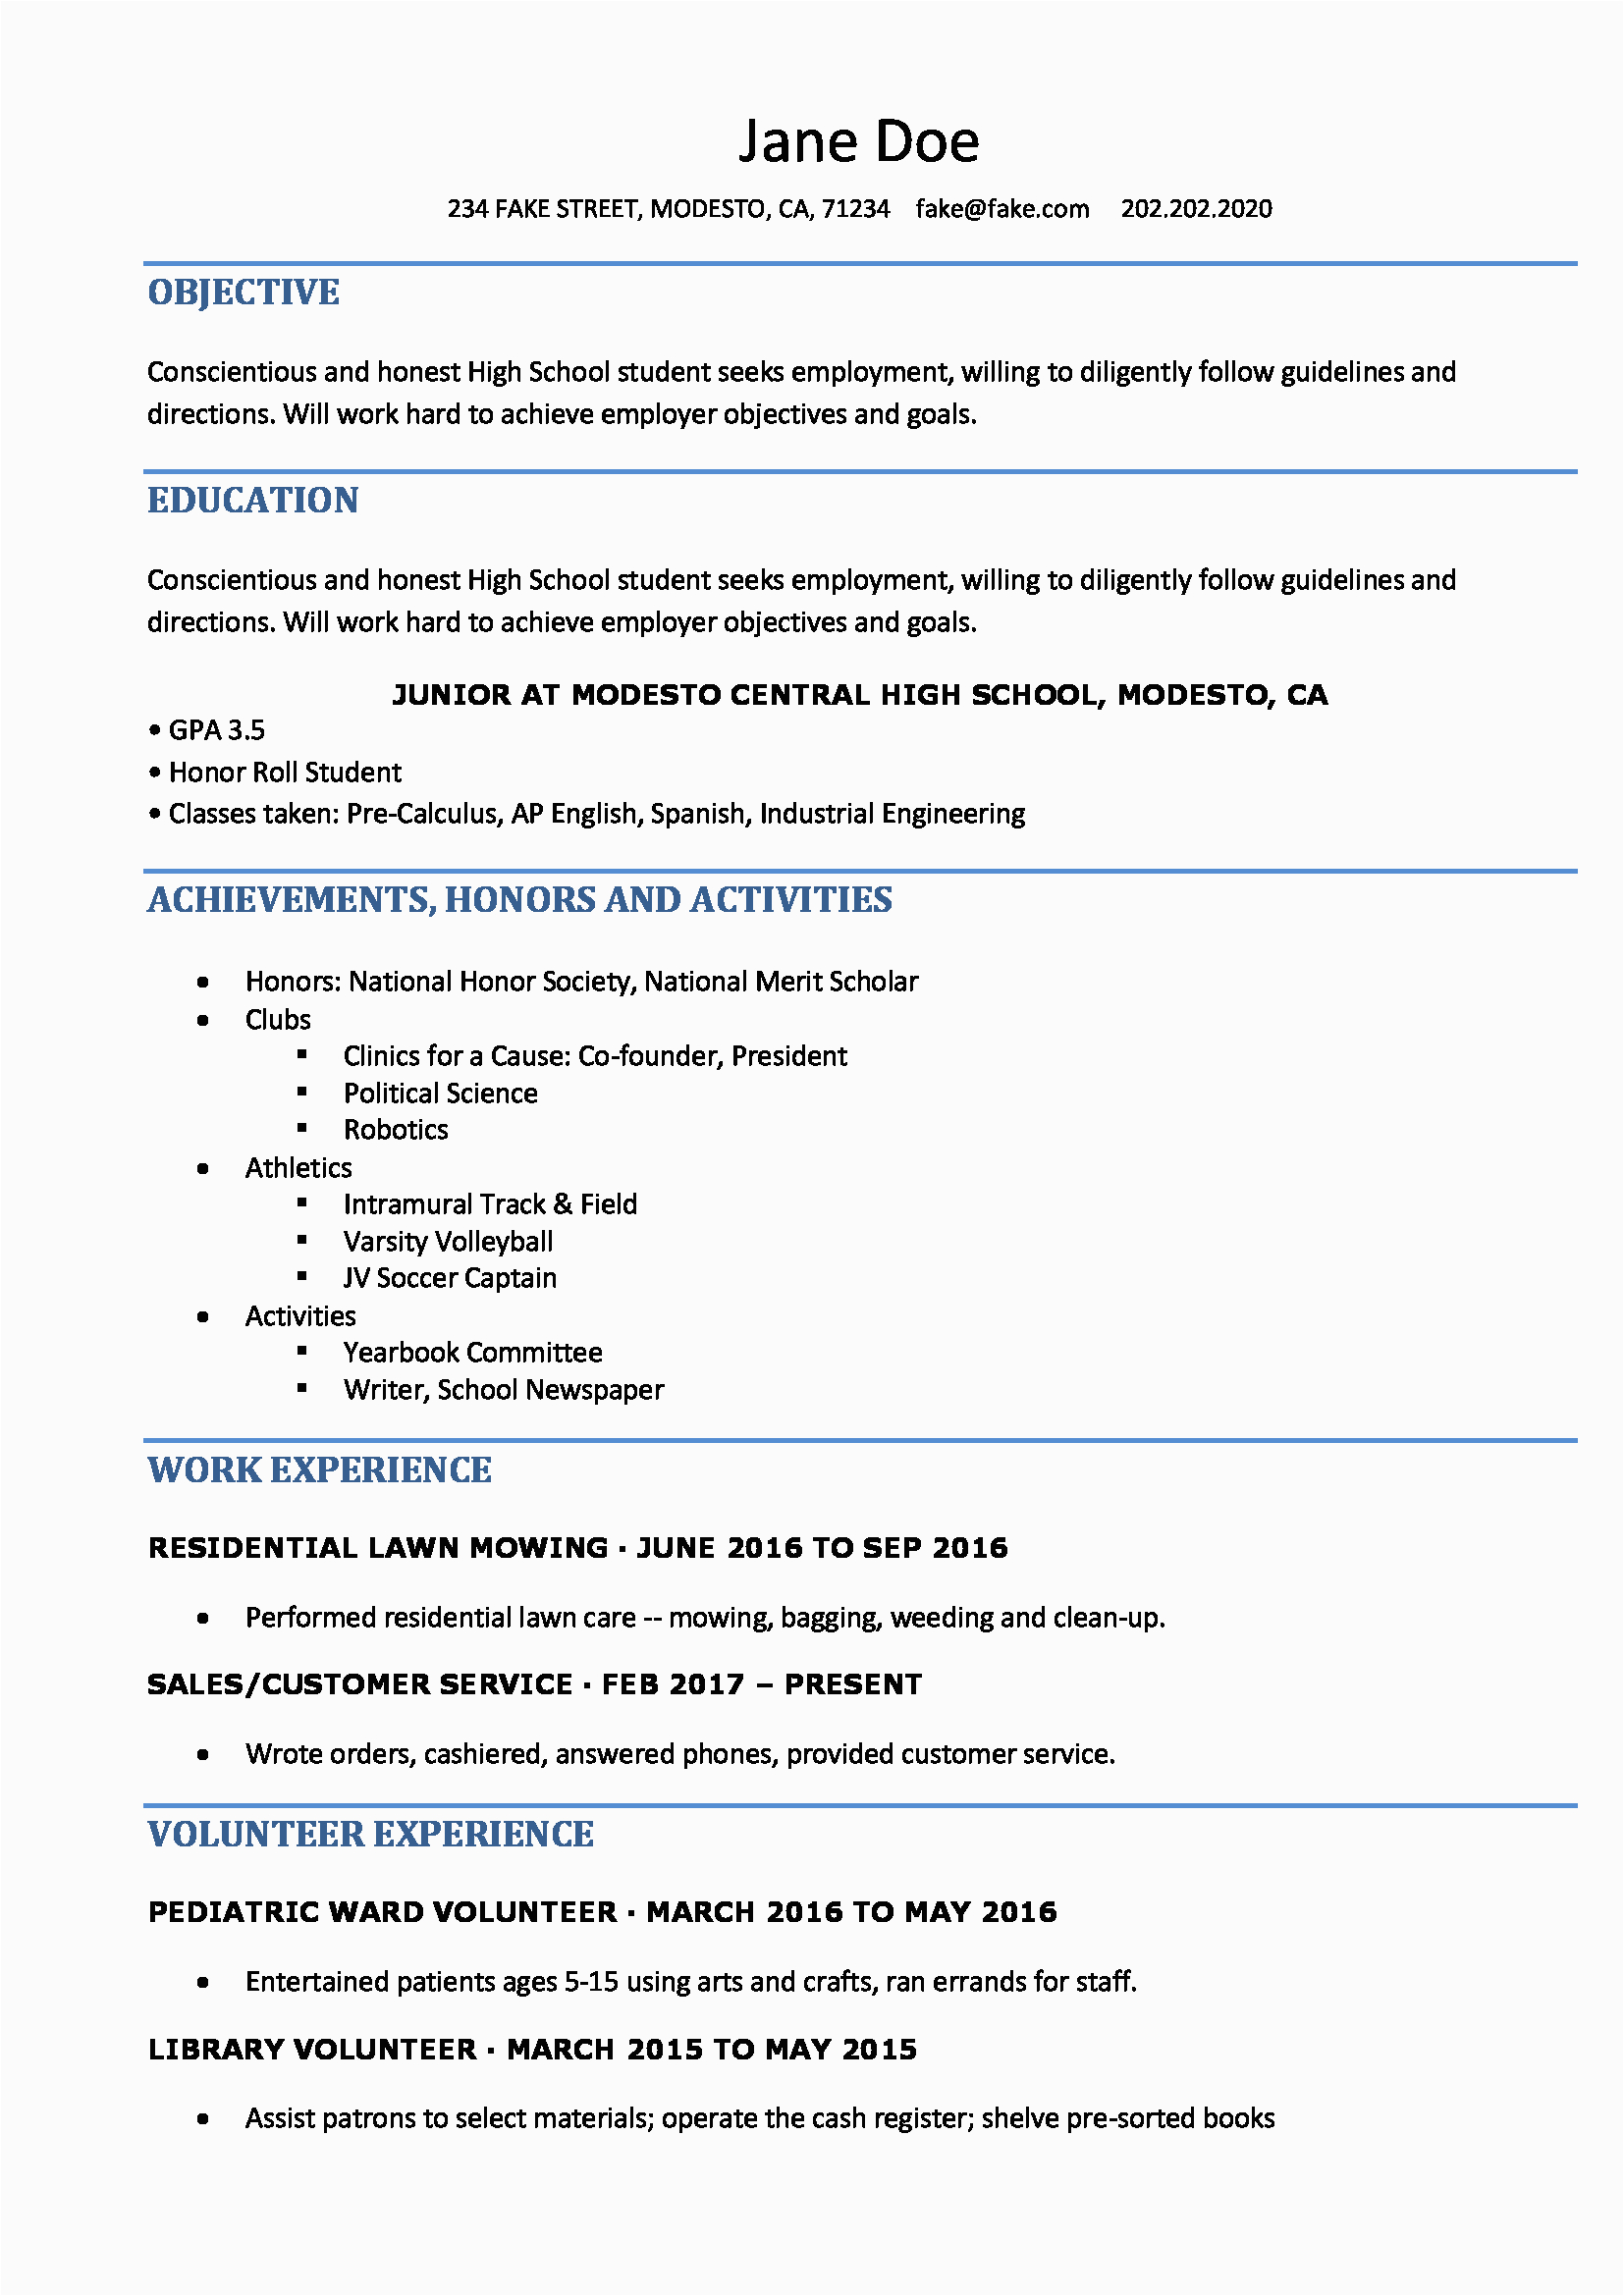 Resume Templates for High School Students Free High School Resume Resume Templates for High School